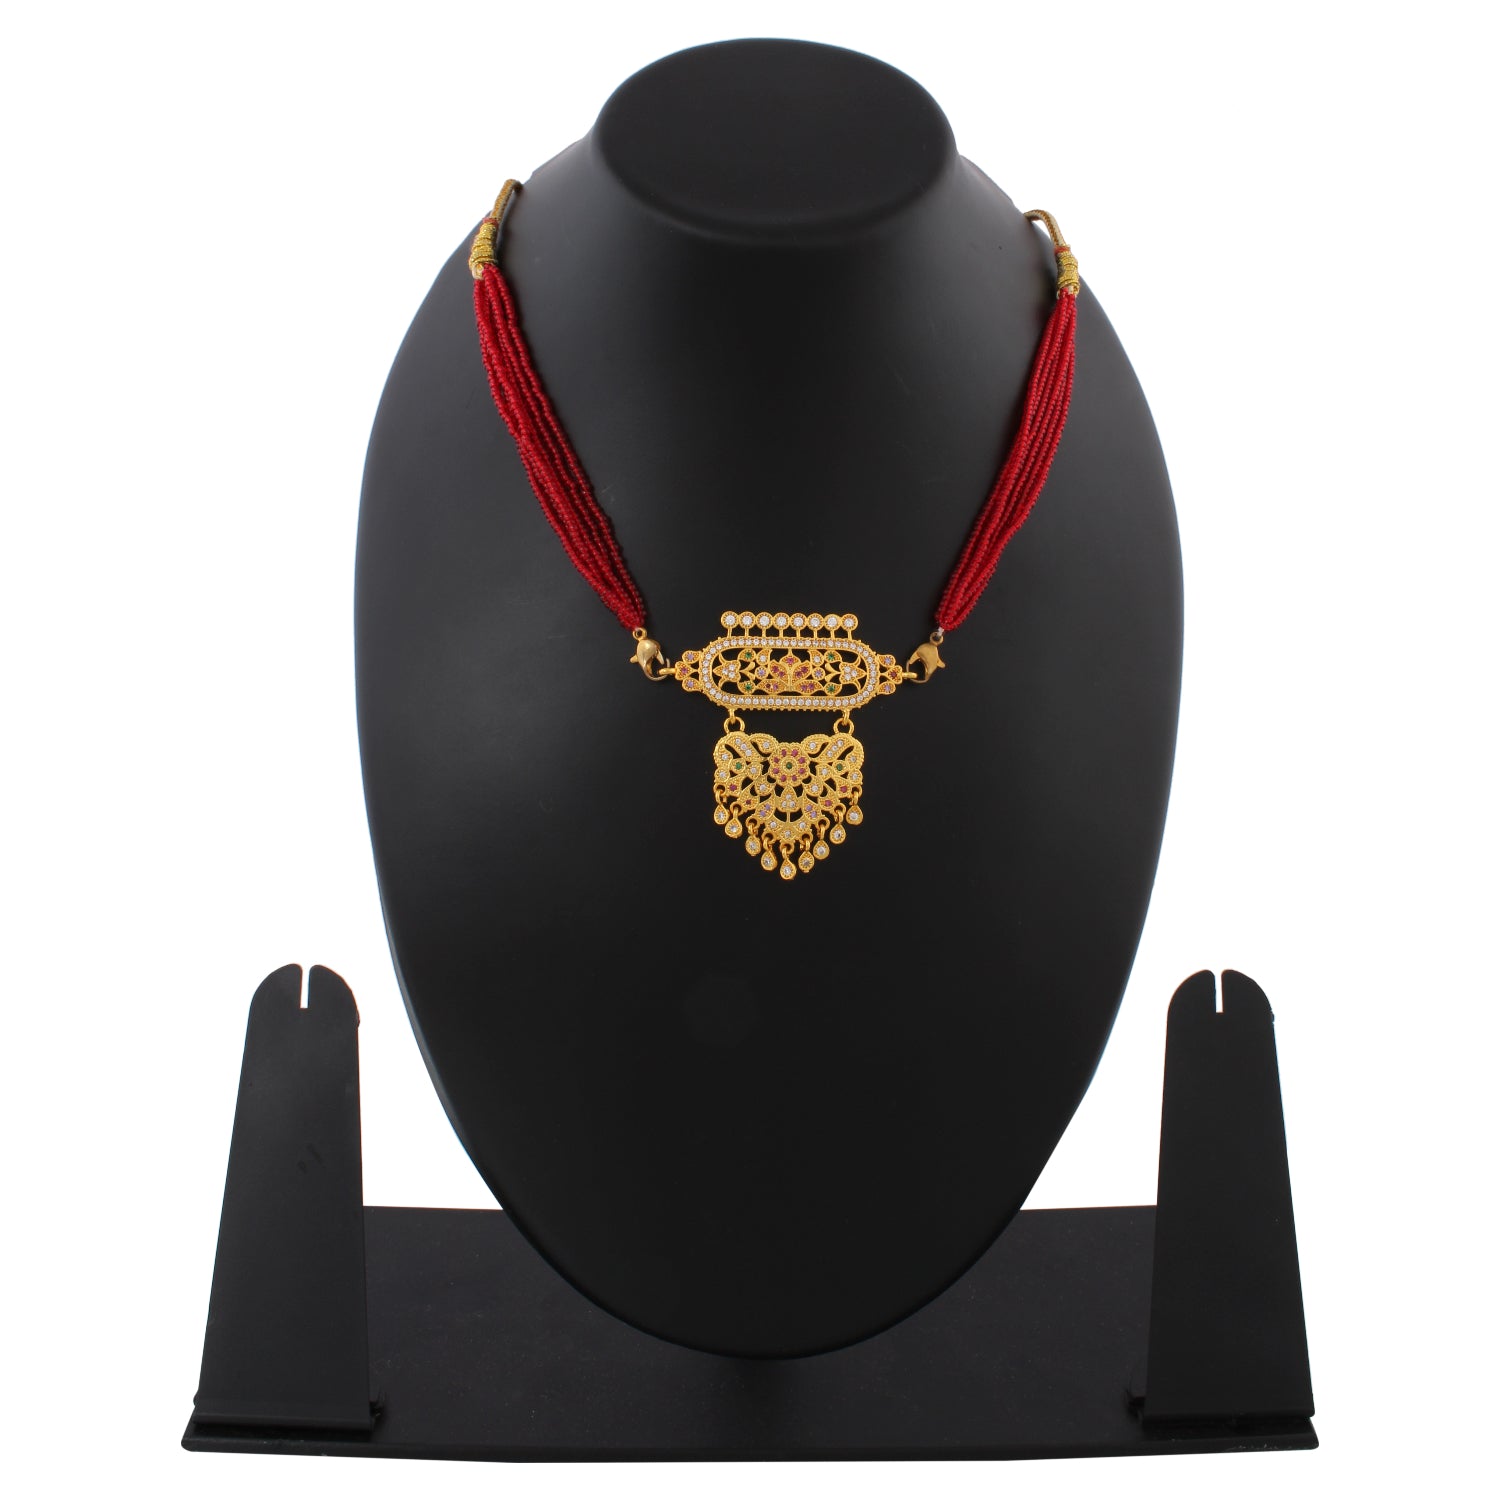 Indian Jewellery from Meira Jewellery:Rajasthani Jewellery,Rajasthani Rajputi Golden Micro Aad American Diamond multi strand for Women (Small Size) Red